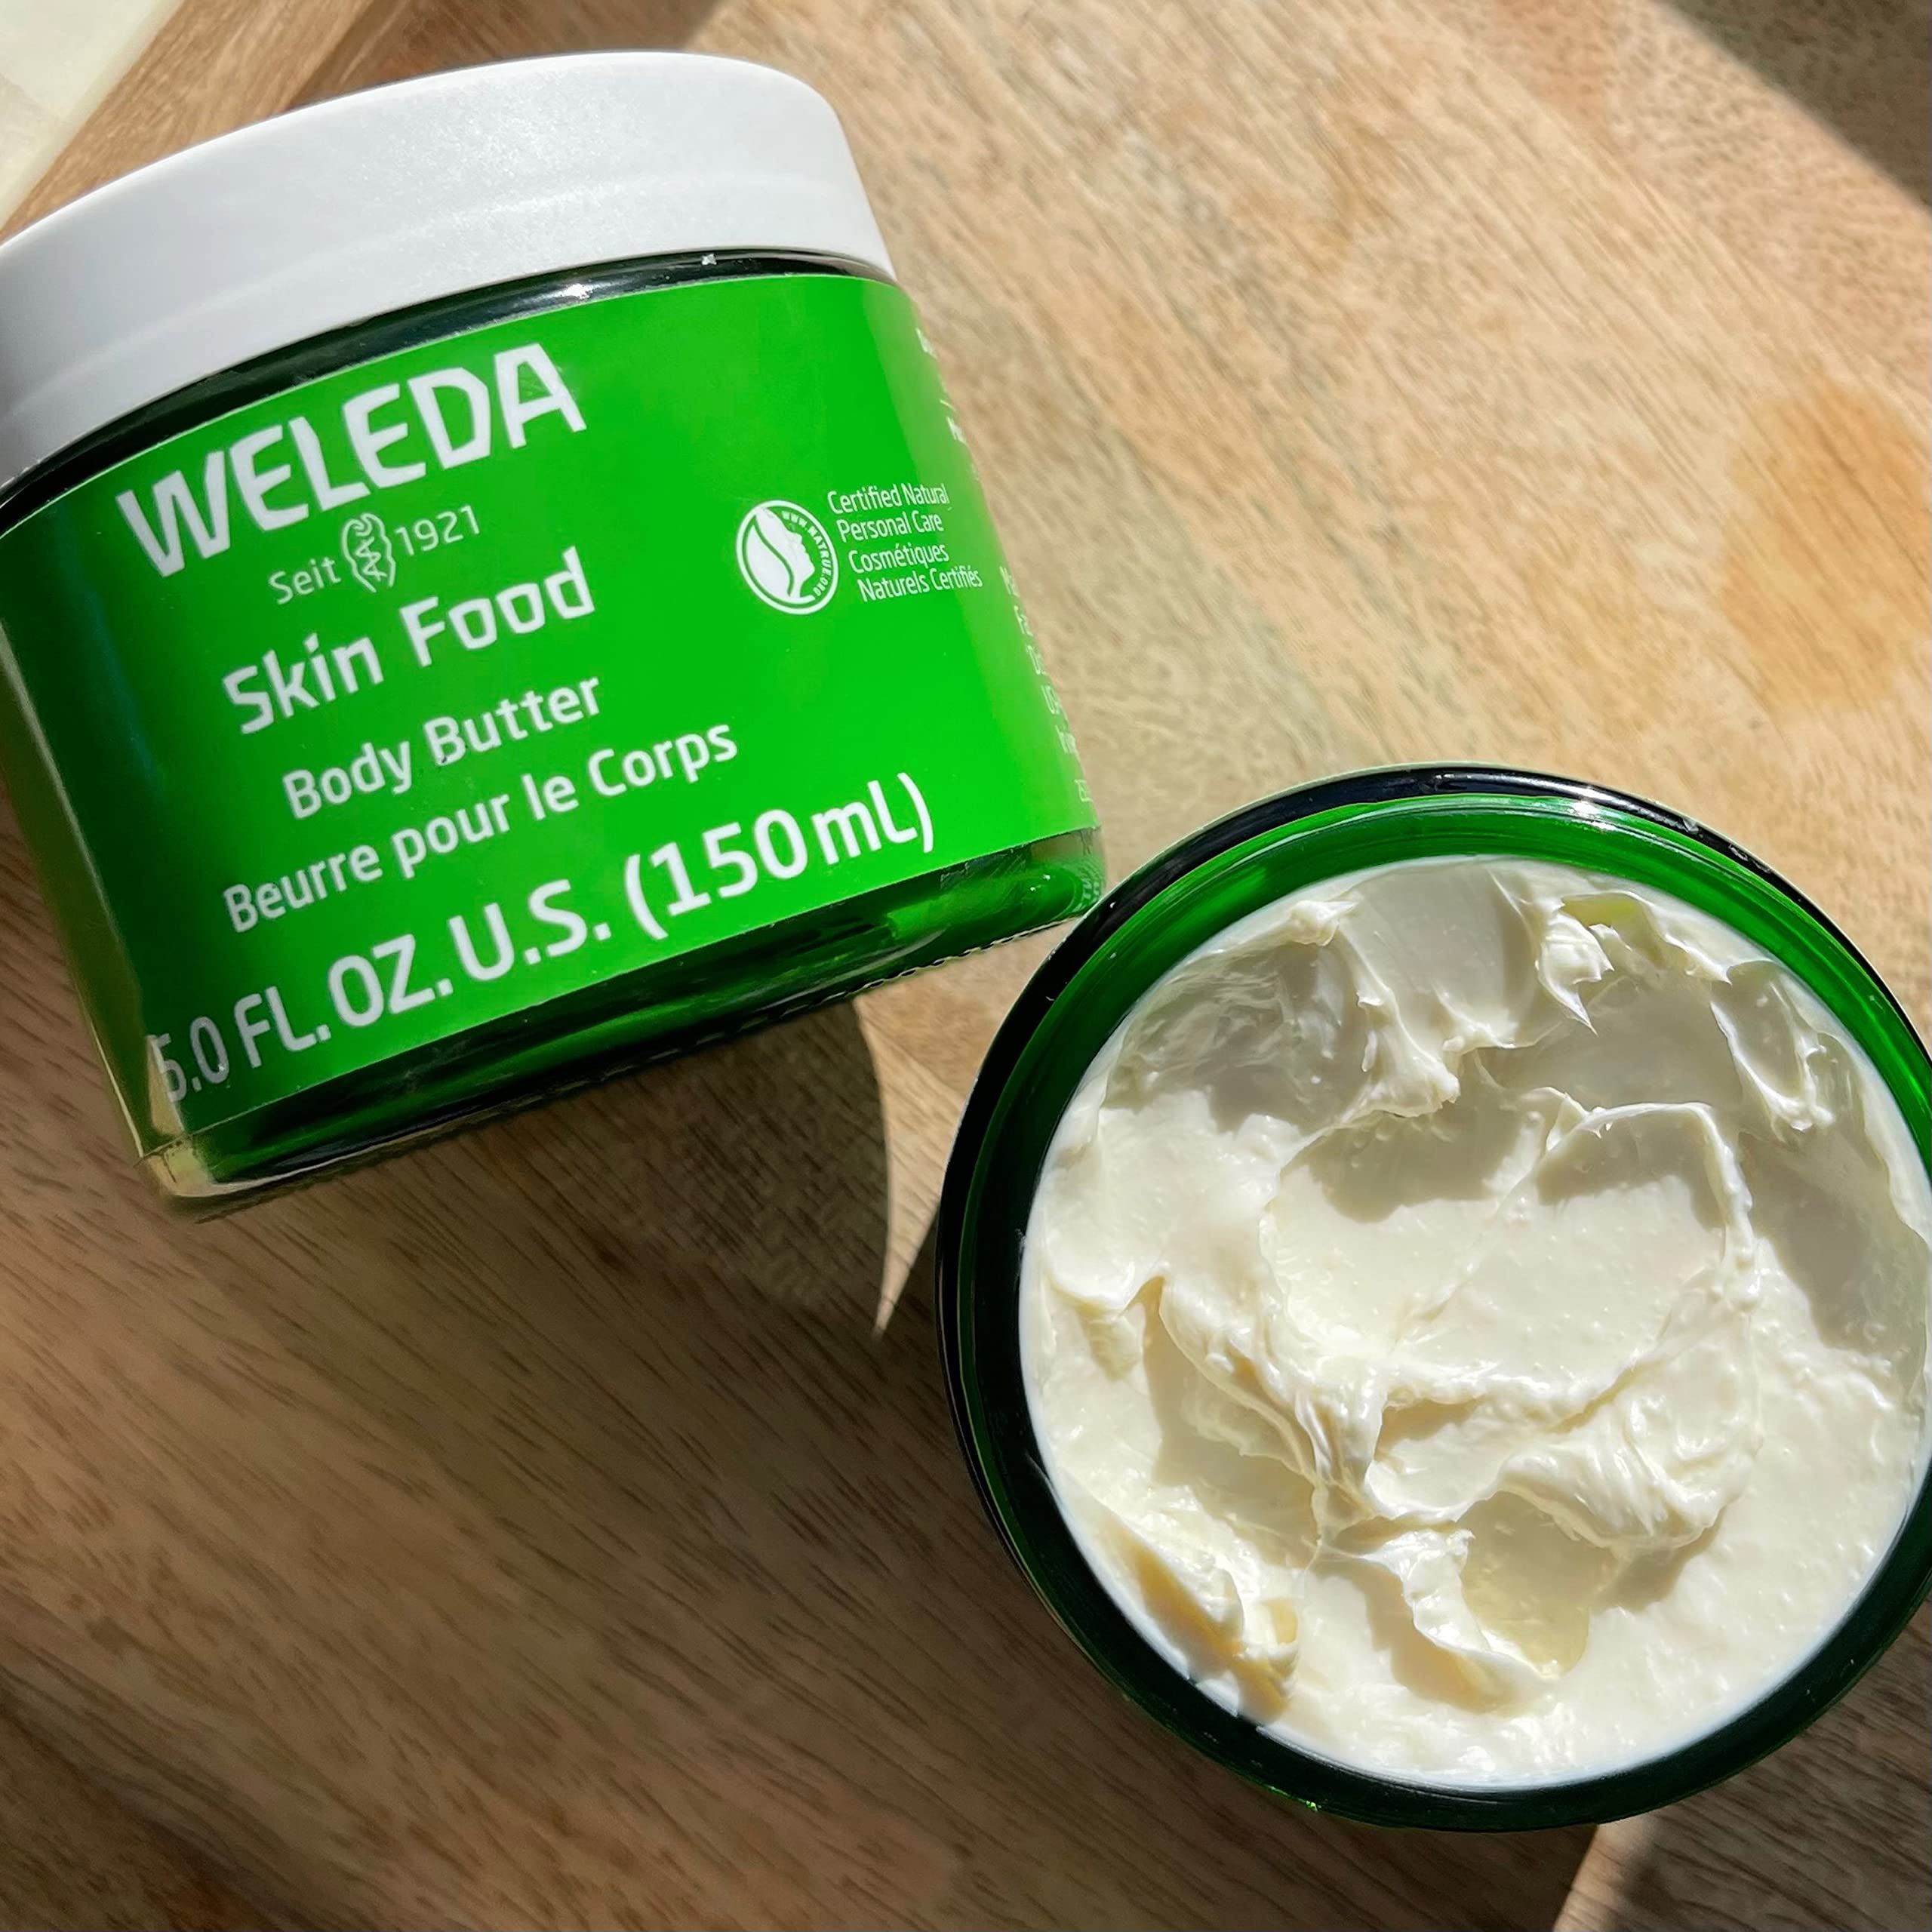 Weleda Skin Food Body Butter 5 Fluid Ounce, Sustainable Glass Jar, Plant Rich Hydrating Moisturizer with Shea and Cocoa Butter, Sweet Almond Oil and Pansy